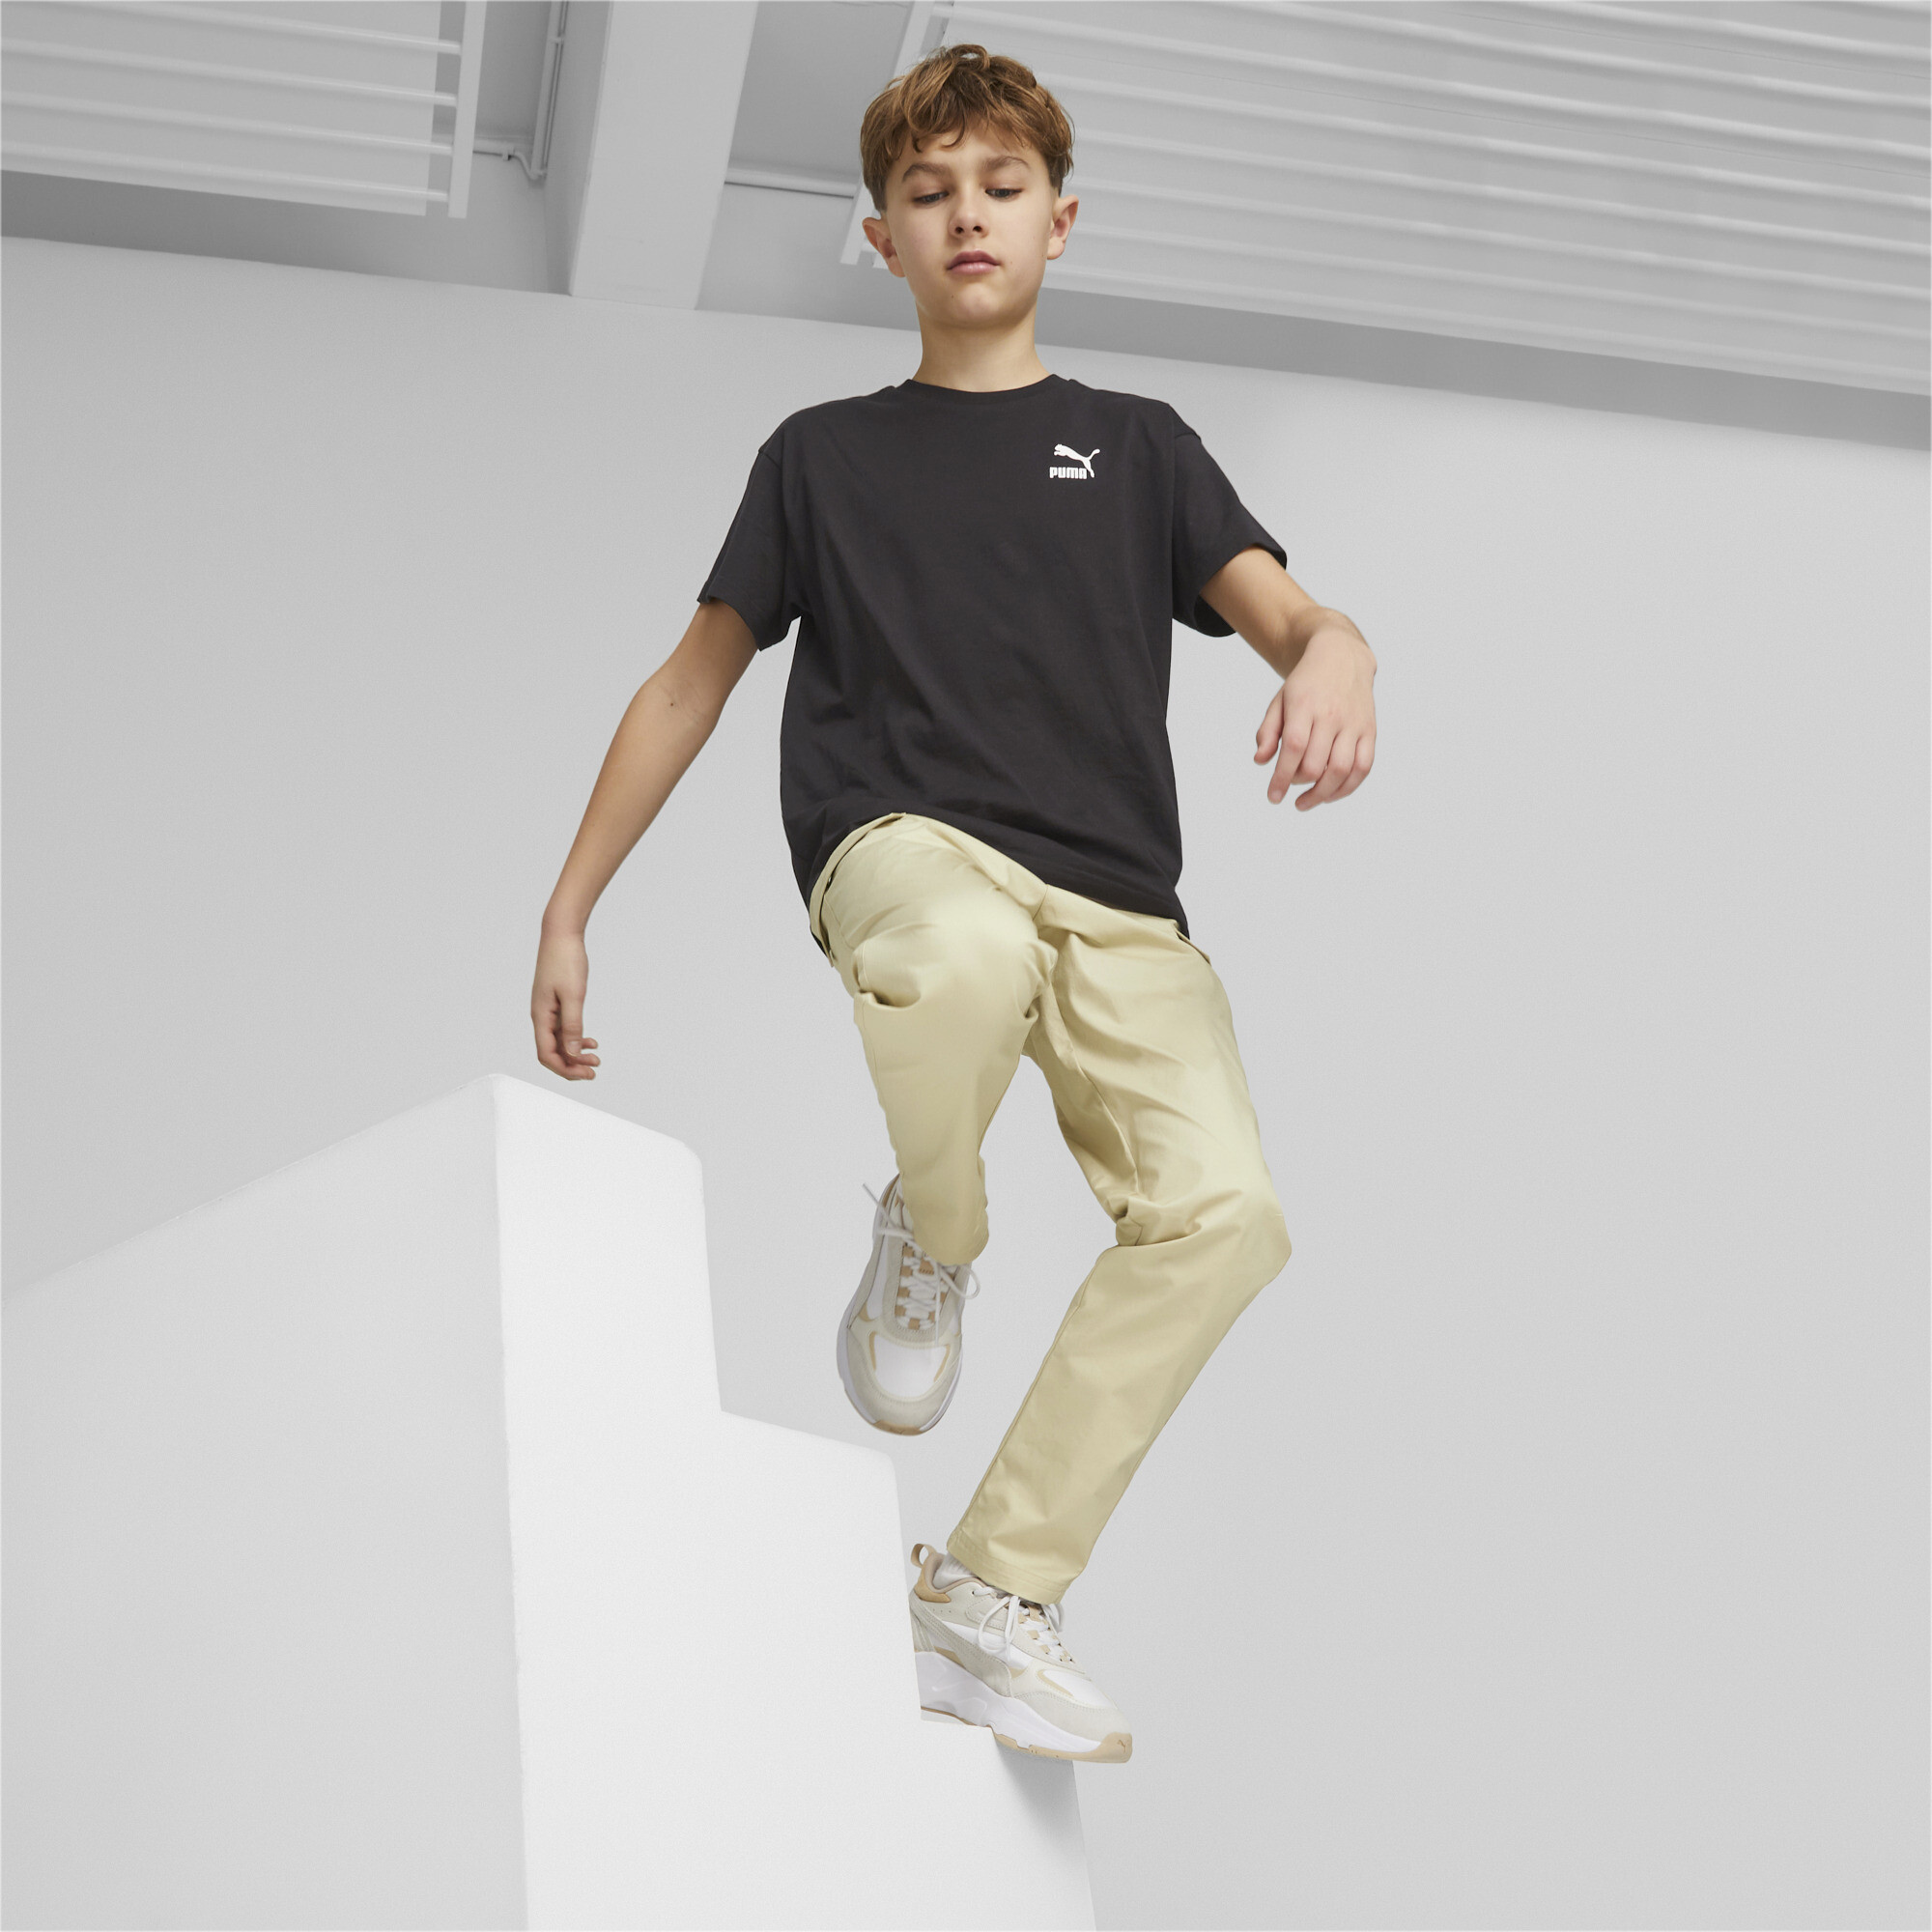 Puma Classics Woven Sweatpants Youth, Beige, Size 3-4Y, Clothing